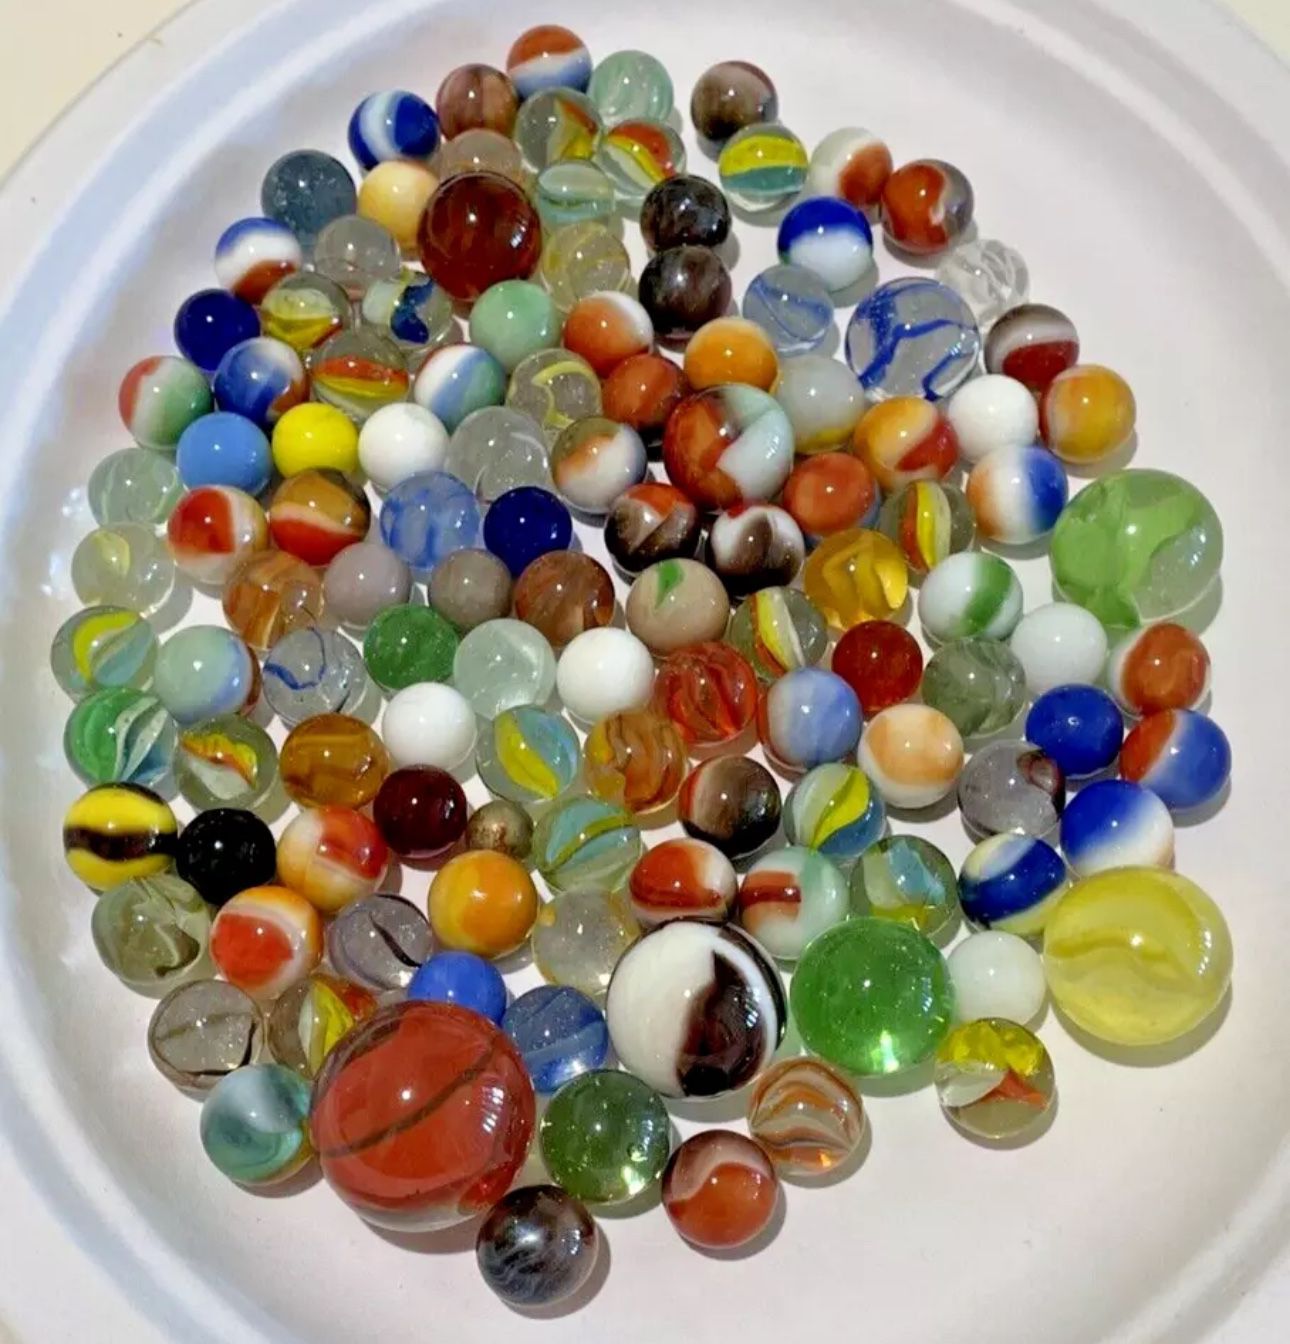 Vintage Mixed Lot Glass Toy Marbles More Than 100 Units 1.53 lb